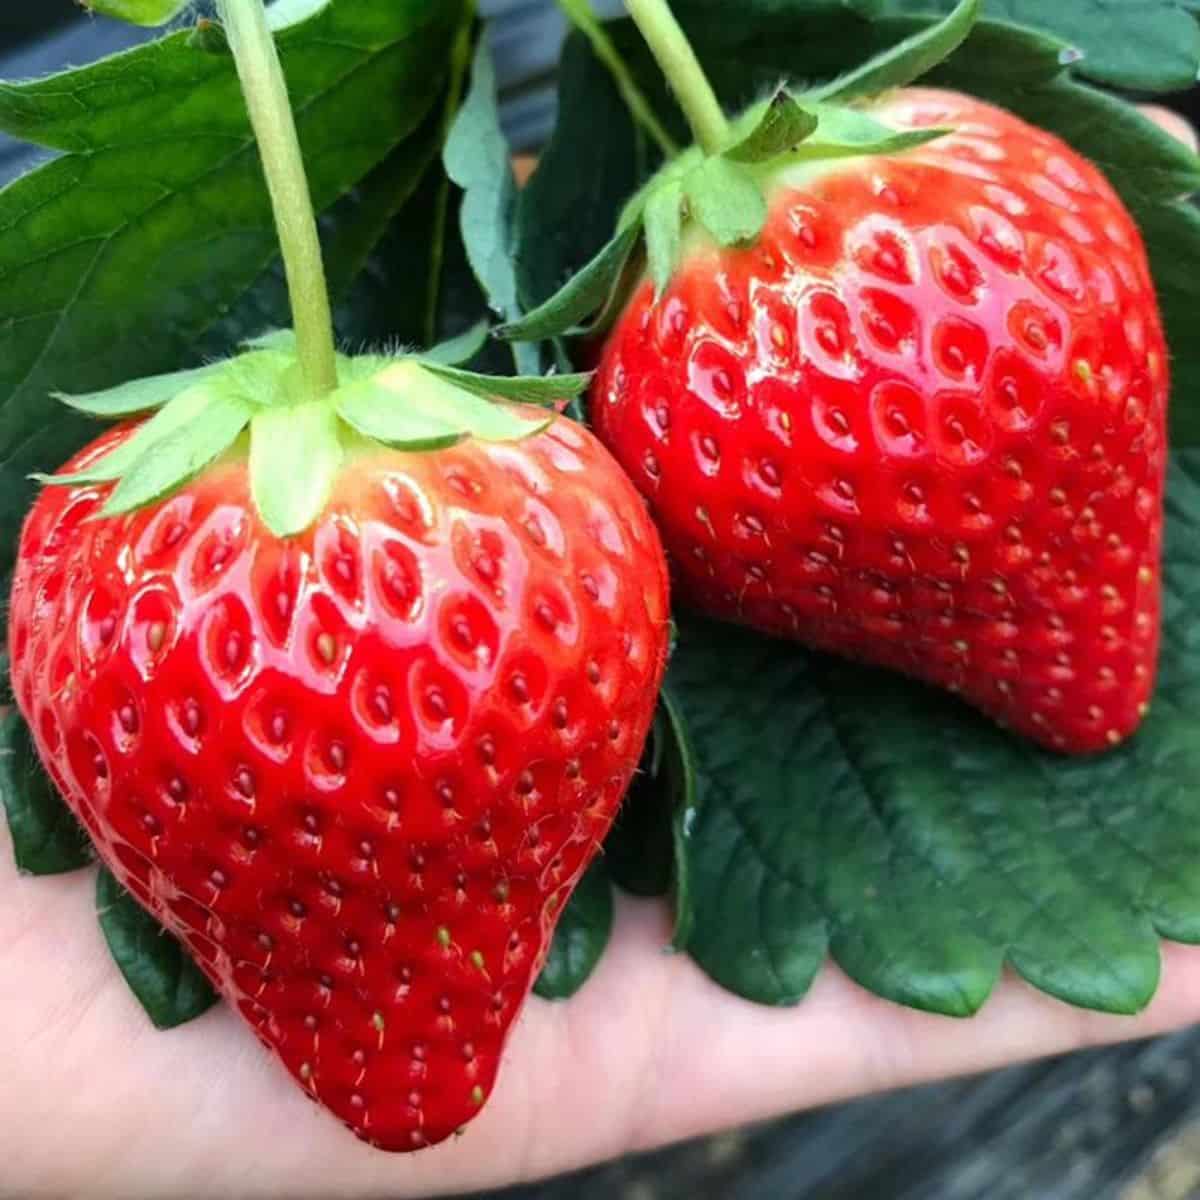 Two ripe Sweet Kiss strawberry variety fruits.